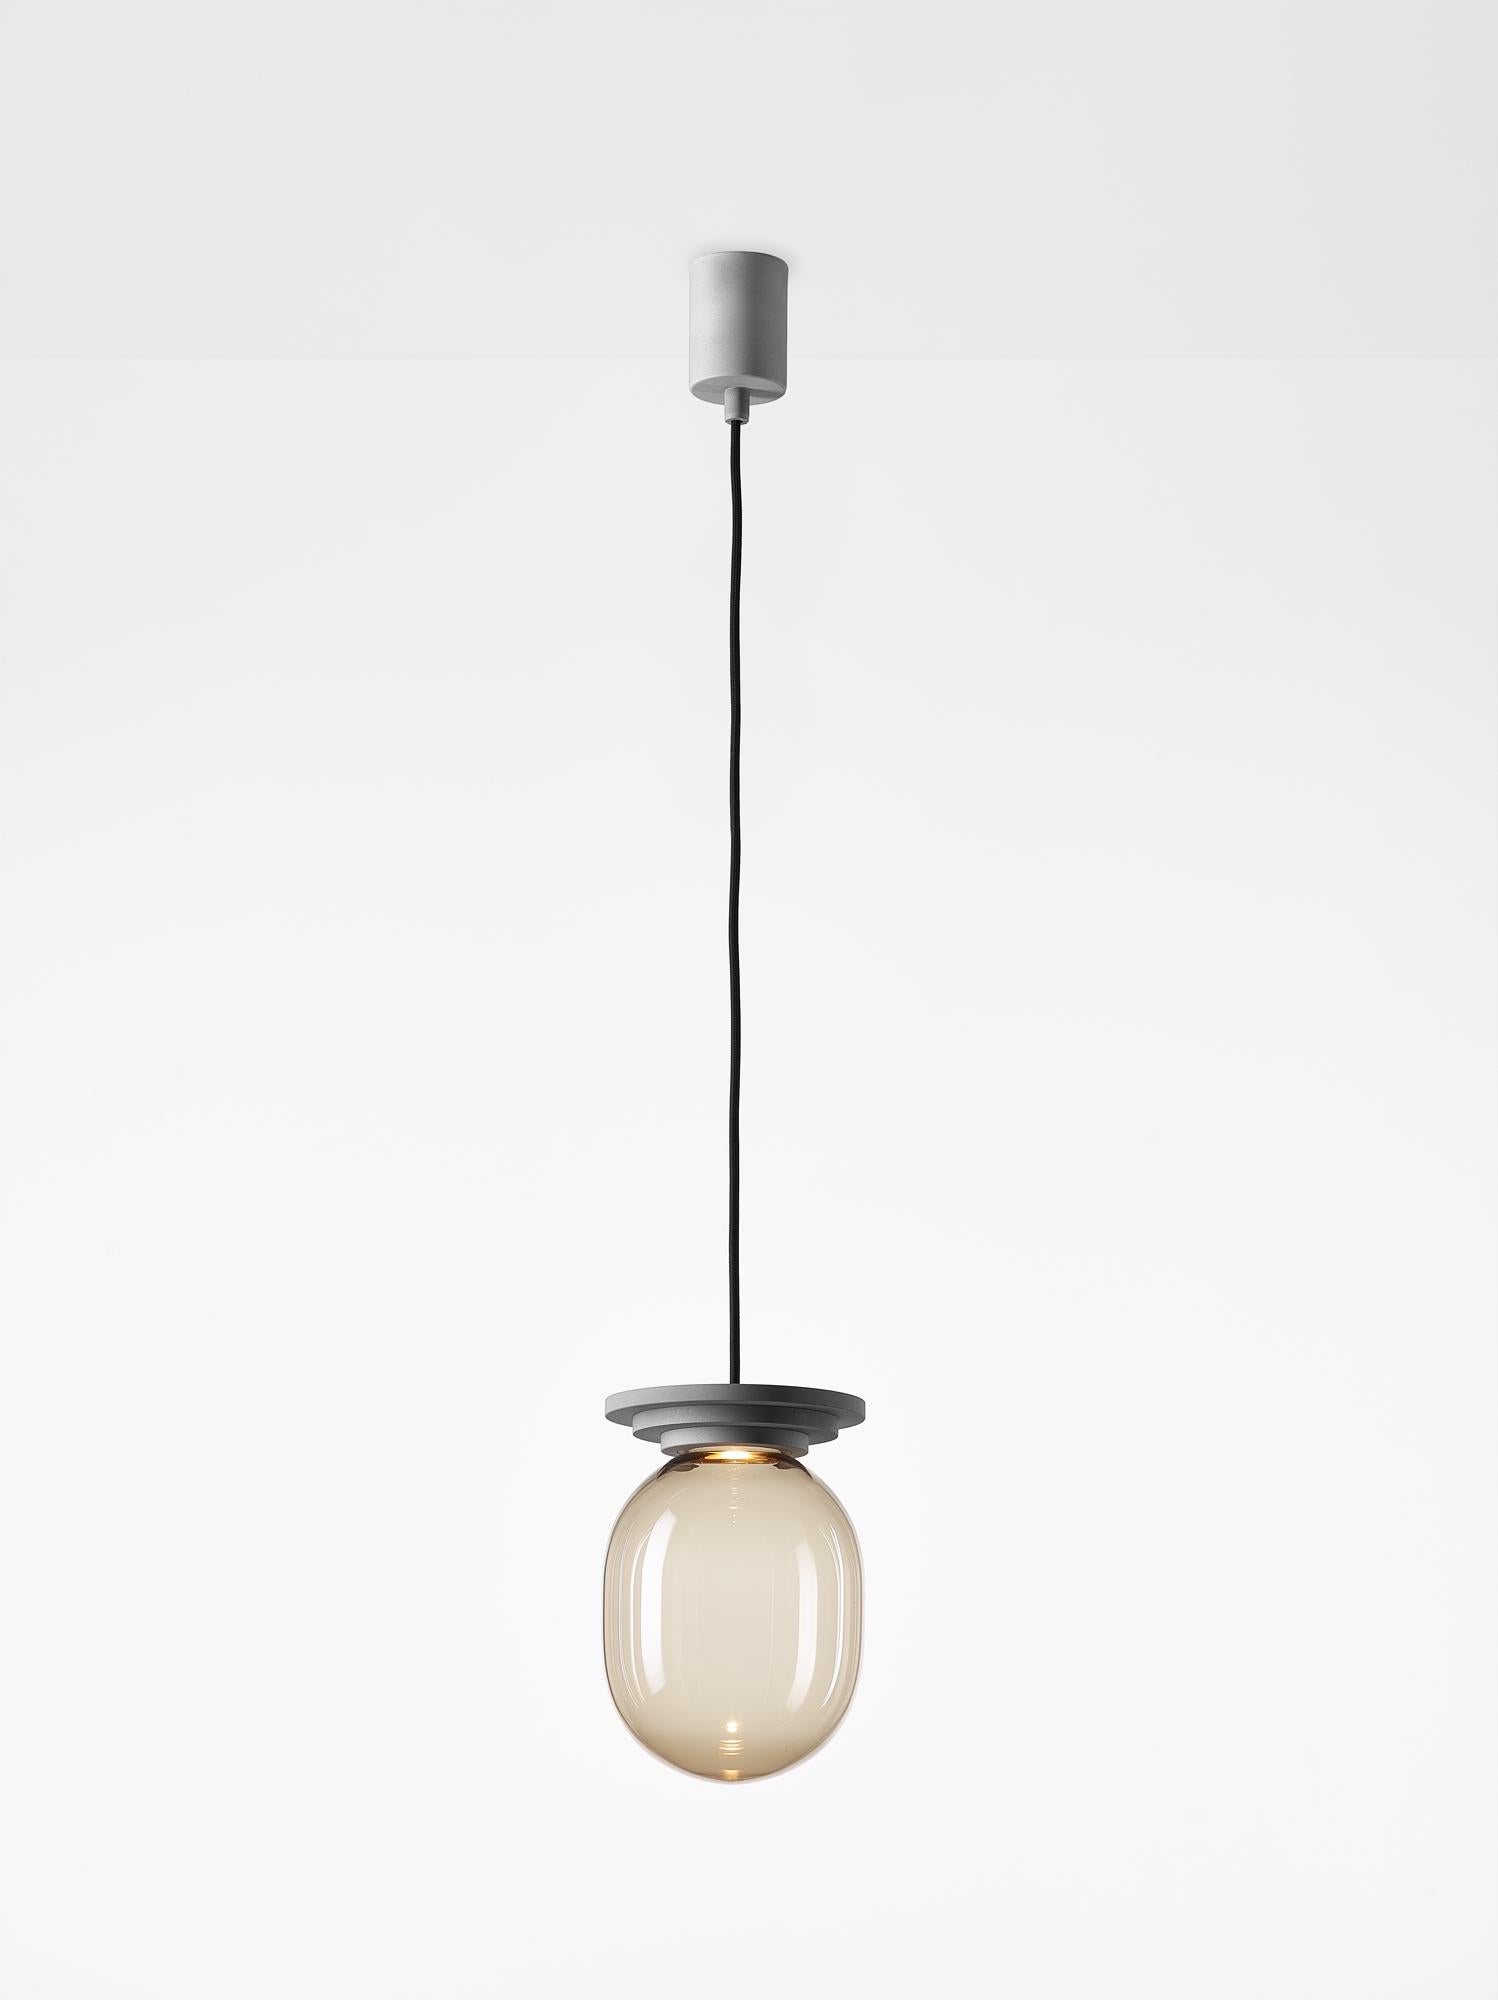 Silver Stratos big capsule pendant light by Dechem Studio
Dimensions: D 20 x H 28 cm
Materials: aluminum, glass.
Also available: different colours available.

Different shapes of capsules and spheres contrast with anodized alloy fixtures,